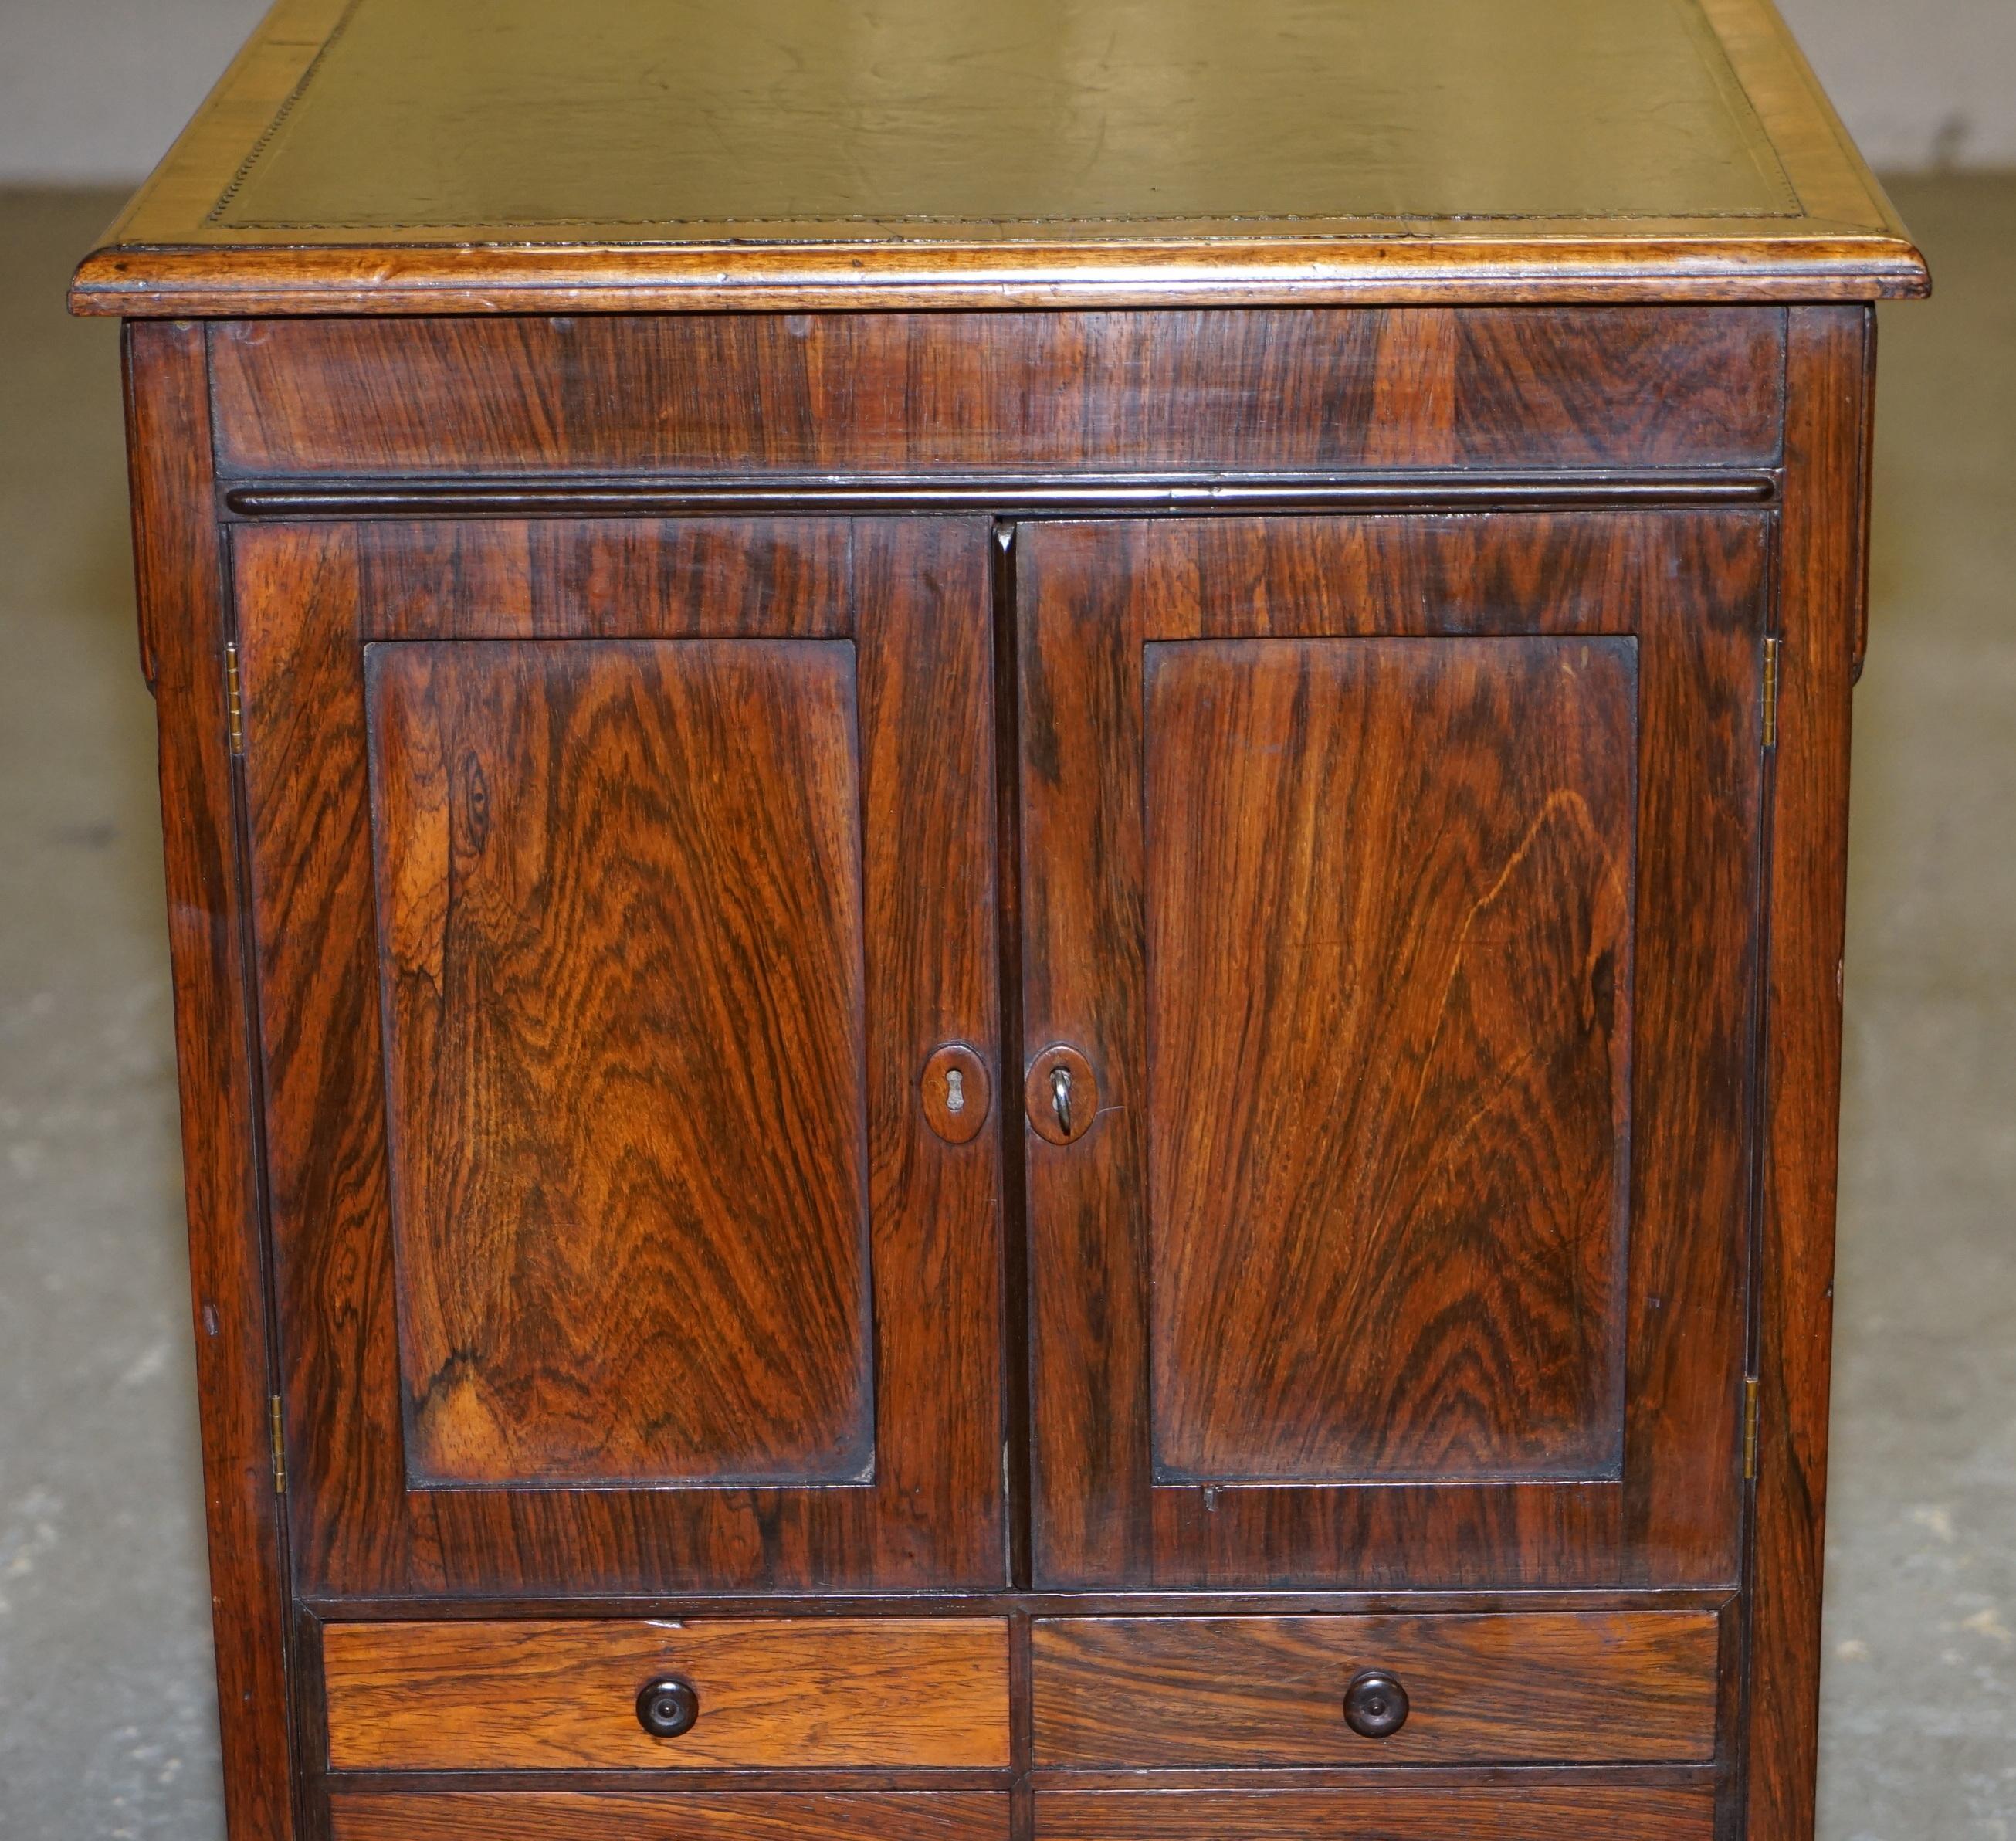 RARE WILLIAM IV CIRCA 1830 HARDWOOD LIBRARY FOLIO CABiNET WITH DRAWERS BOOKCASE For Sale 3